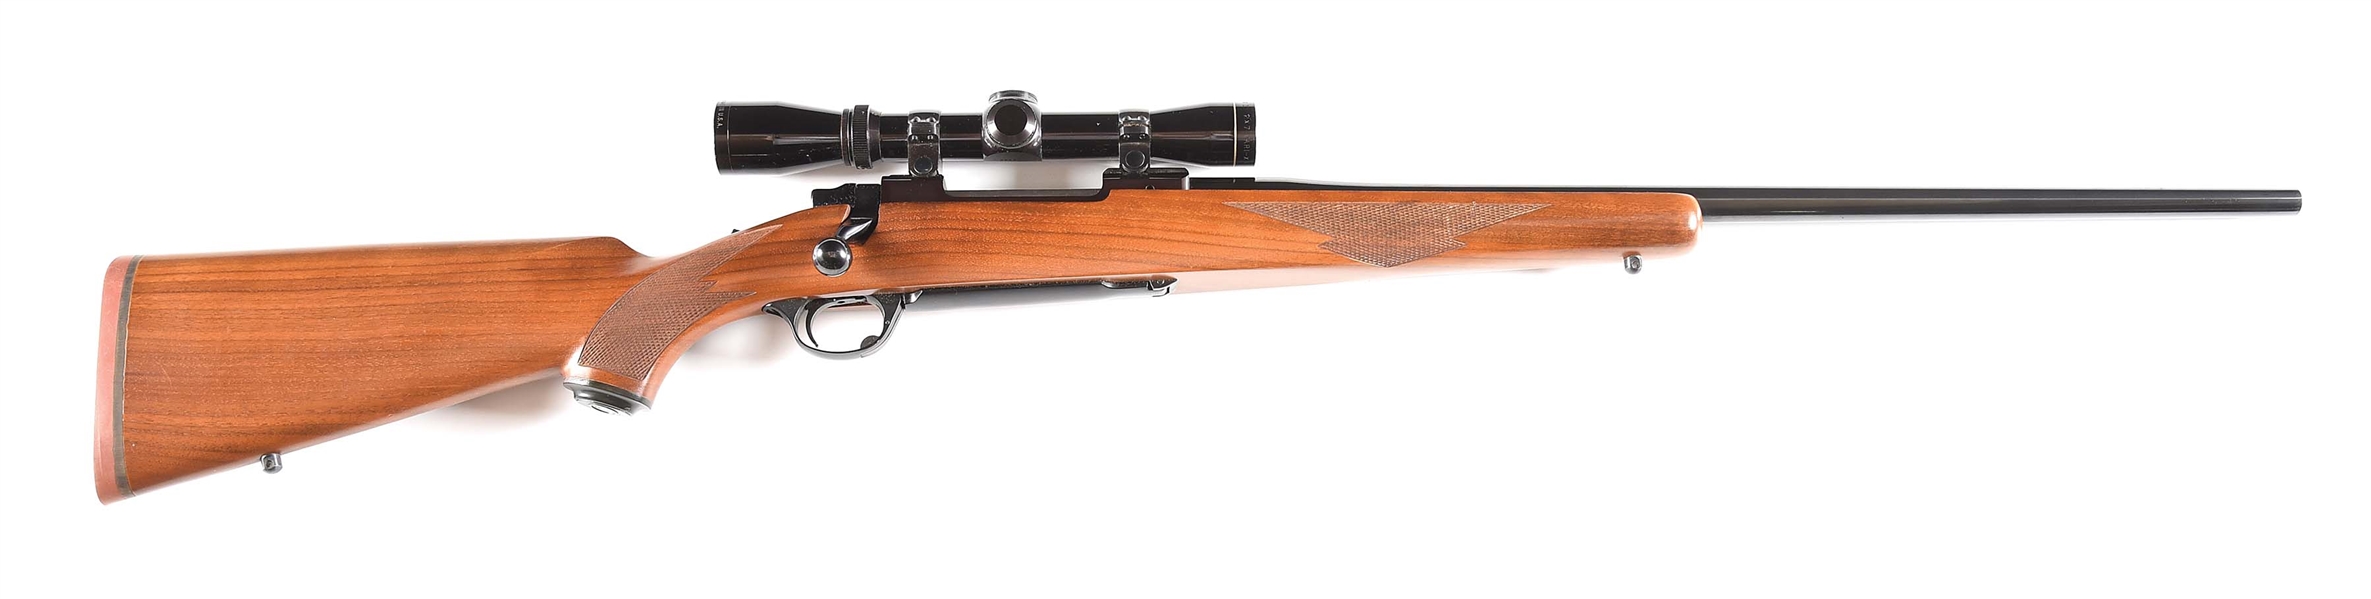 (M) RUGER MODEL 77 .338 WIN MAG BOLT ACTION RIFLE WITH SCOPE.